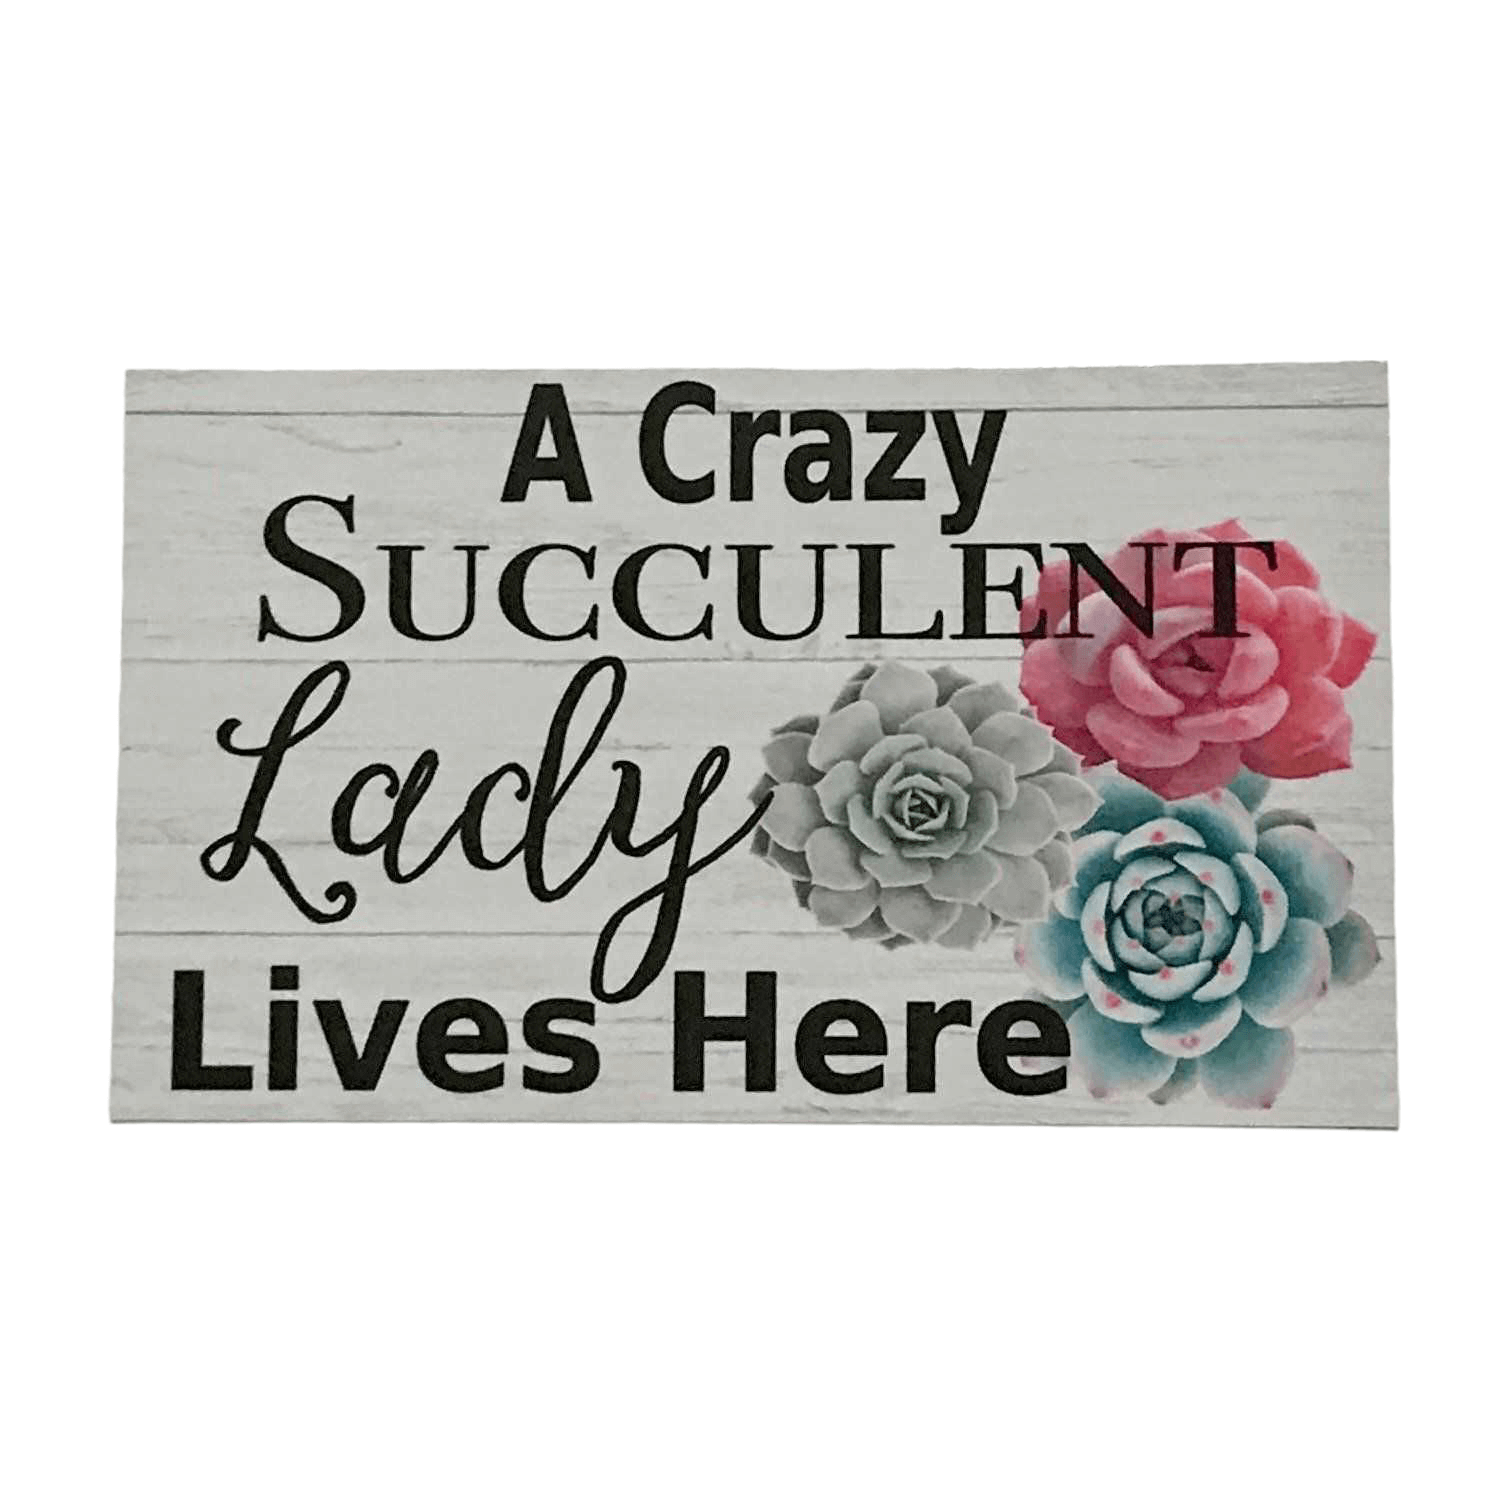 Crazy Succulent Lady Lives Here Sign - The Renmy Store Homewares & Gifts 